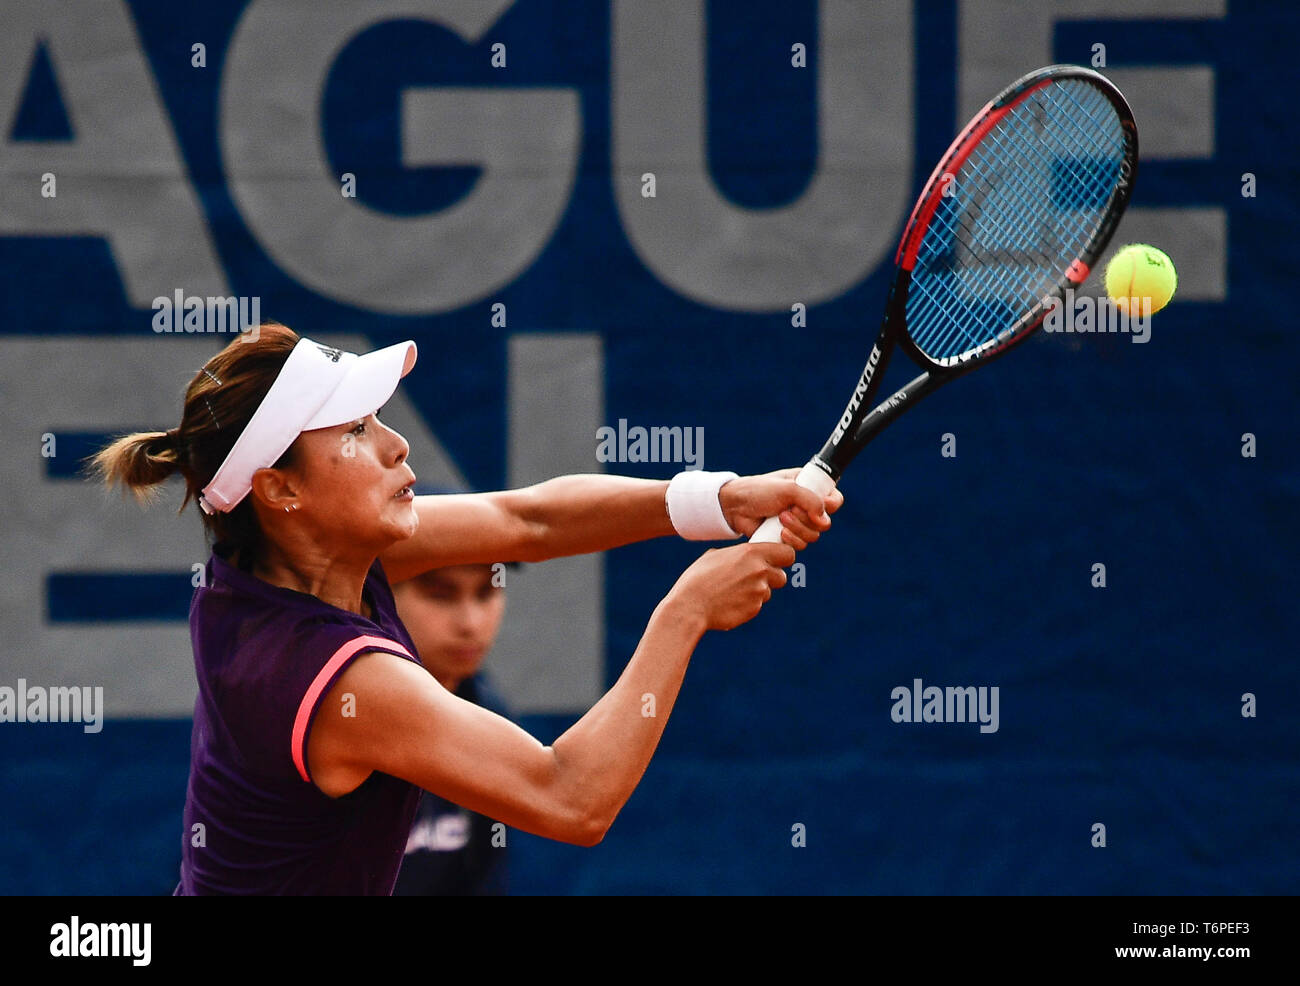 Prague, Czech Republic. 02nd May, 2019. Tennis player Wang Qiang of China in action during the match against Bernada Pera of USA in Prague Open women's tennis tournament, Czech Republic, May 2, 2019. Credit: Roman Vondrous/CTK Photo/Alamy Live News Stock Photo